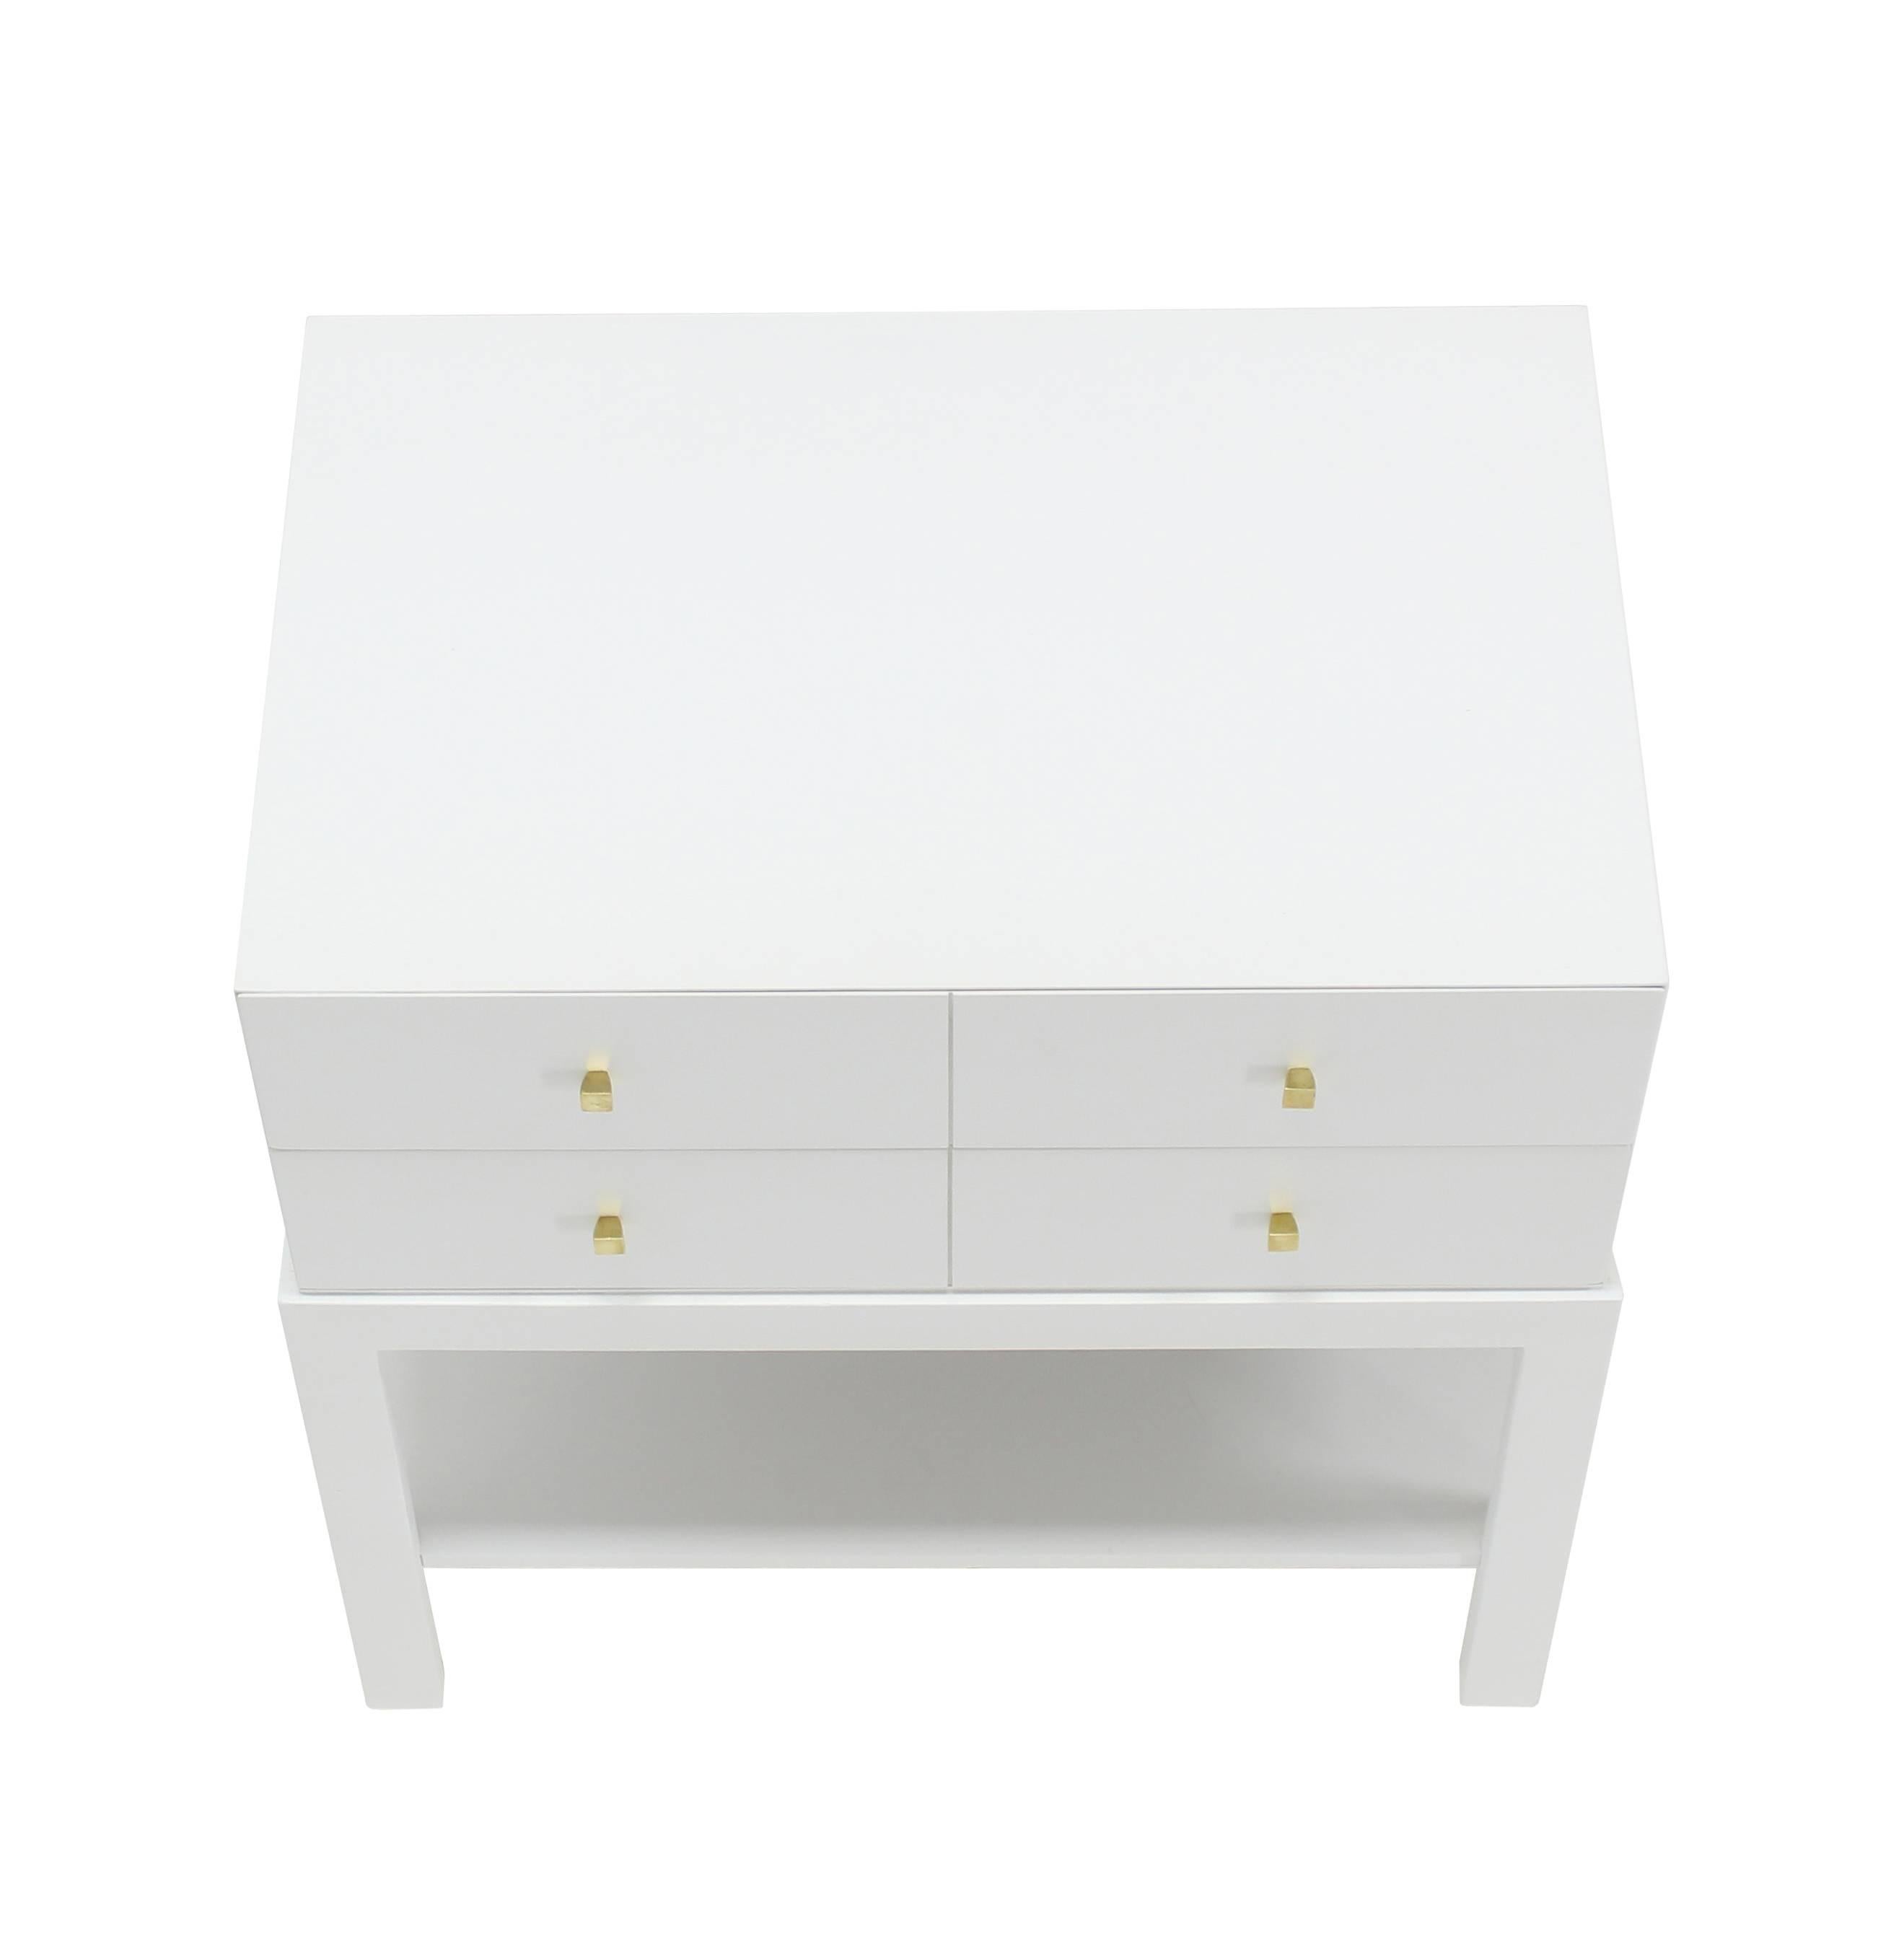 American White Lacquer Diamond Shape Brass Dimond Pulls Two Drawer Nightstand For Sale